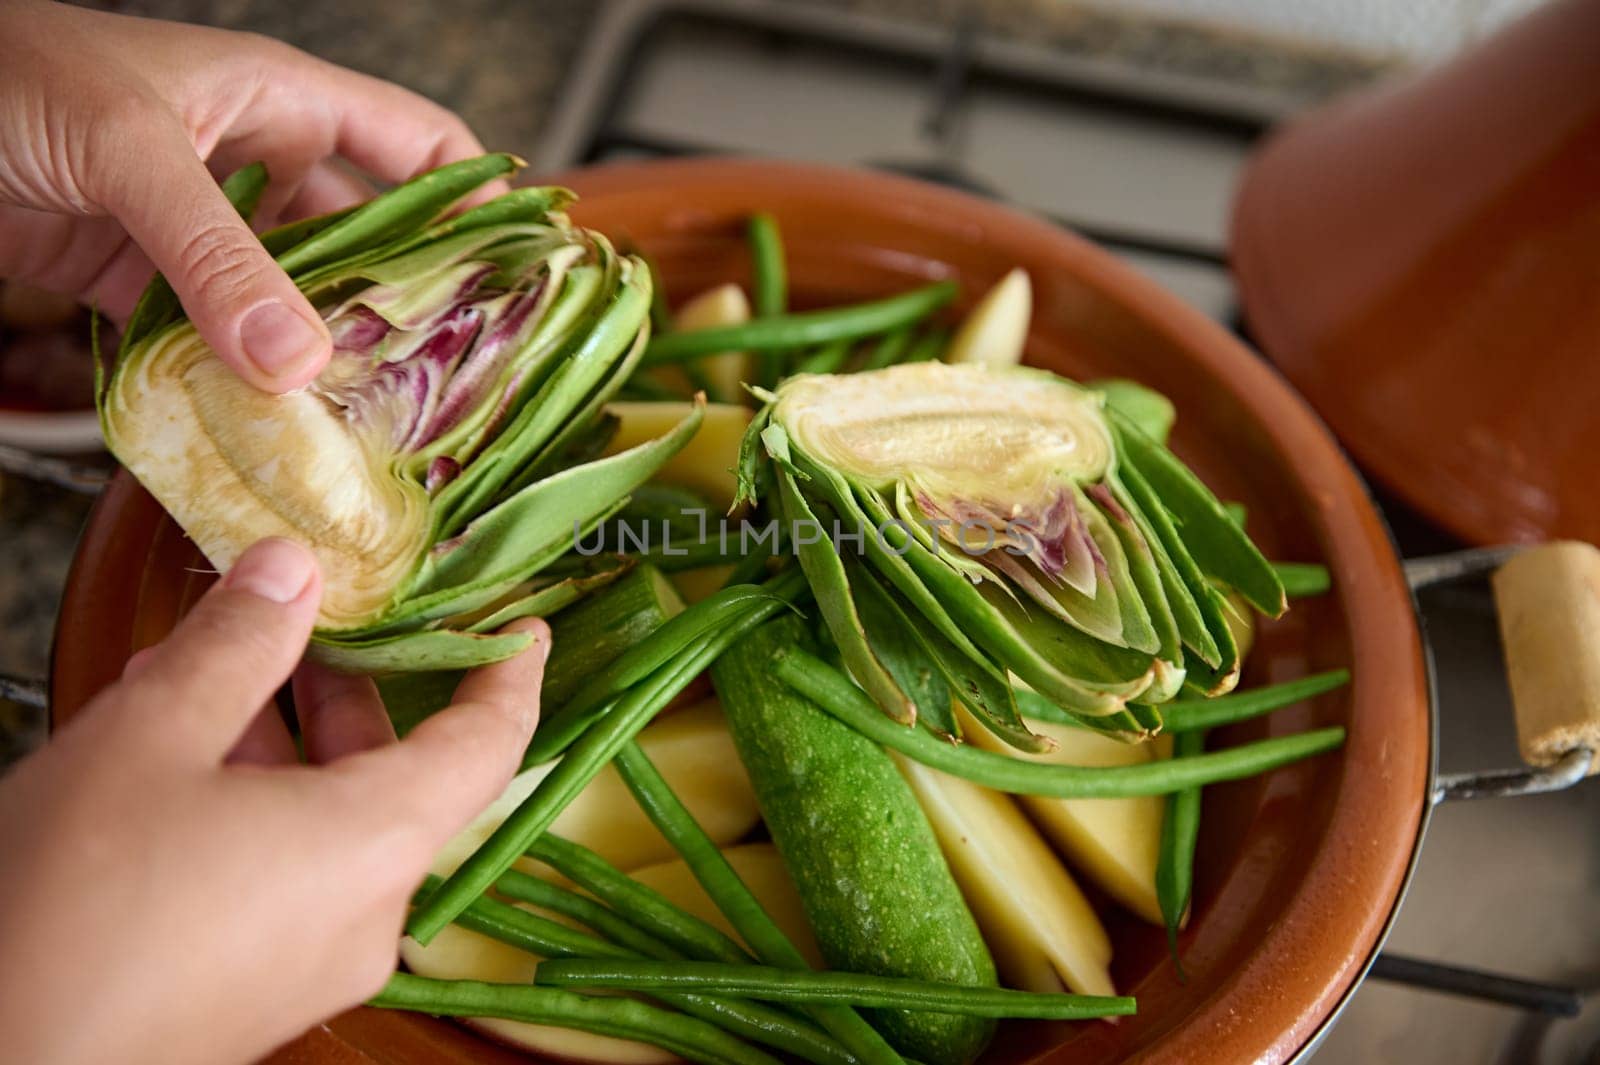 Closeup view of woman's hands putting halves of artichoke flower on a clay dish with vegetables, cooking tagine at home by artgf